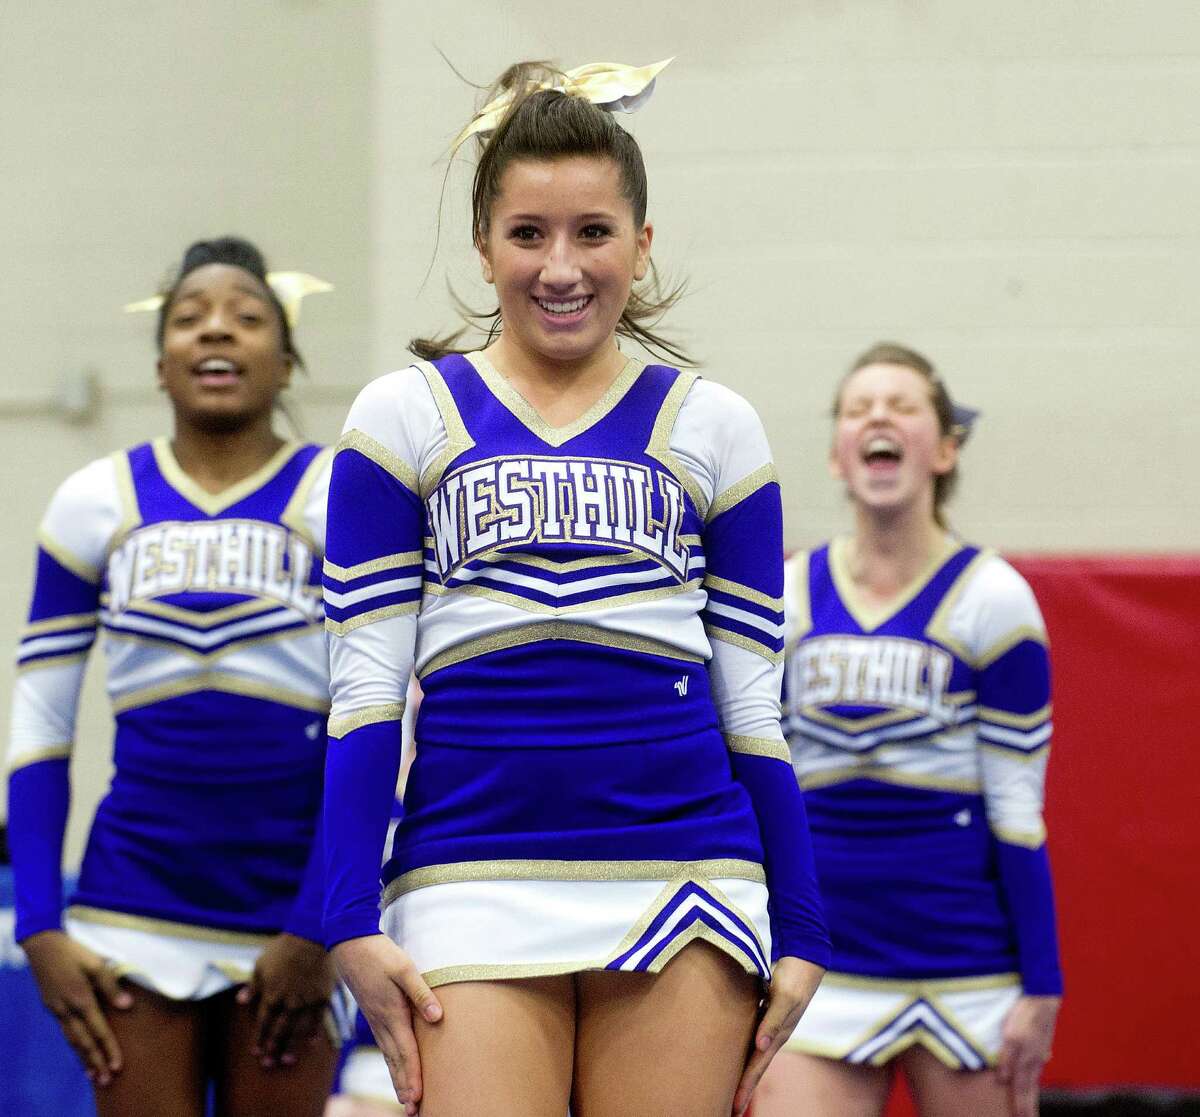 Zoe Carrillo of Westhill High School competes in the FCIAC cheerleading championships at Fairfield Warde High School in Fairfield, Conn., on Saturday, February 1, 2014.